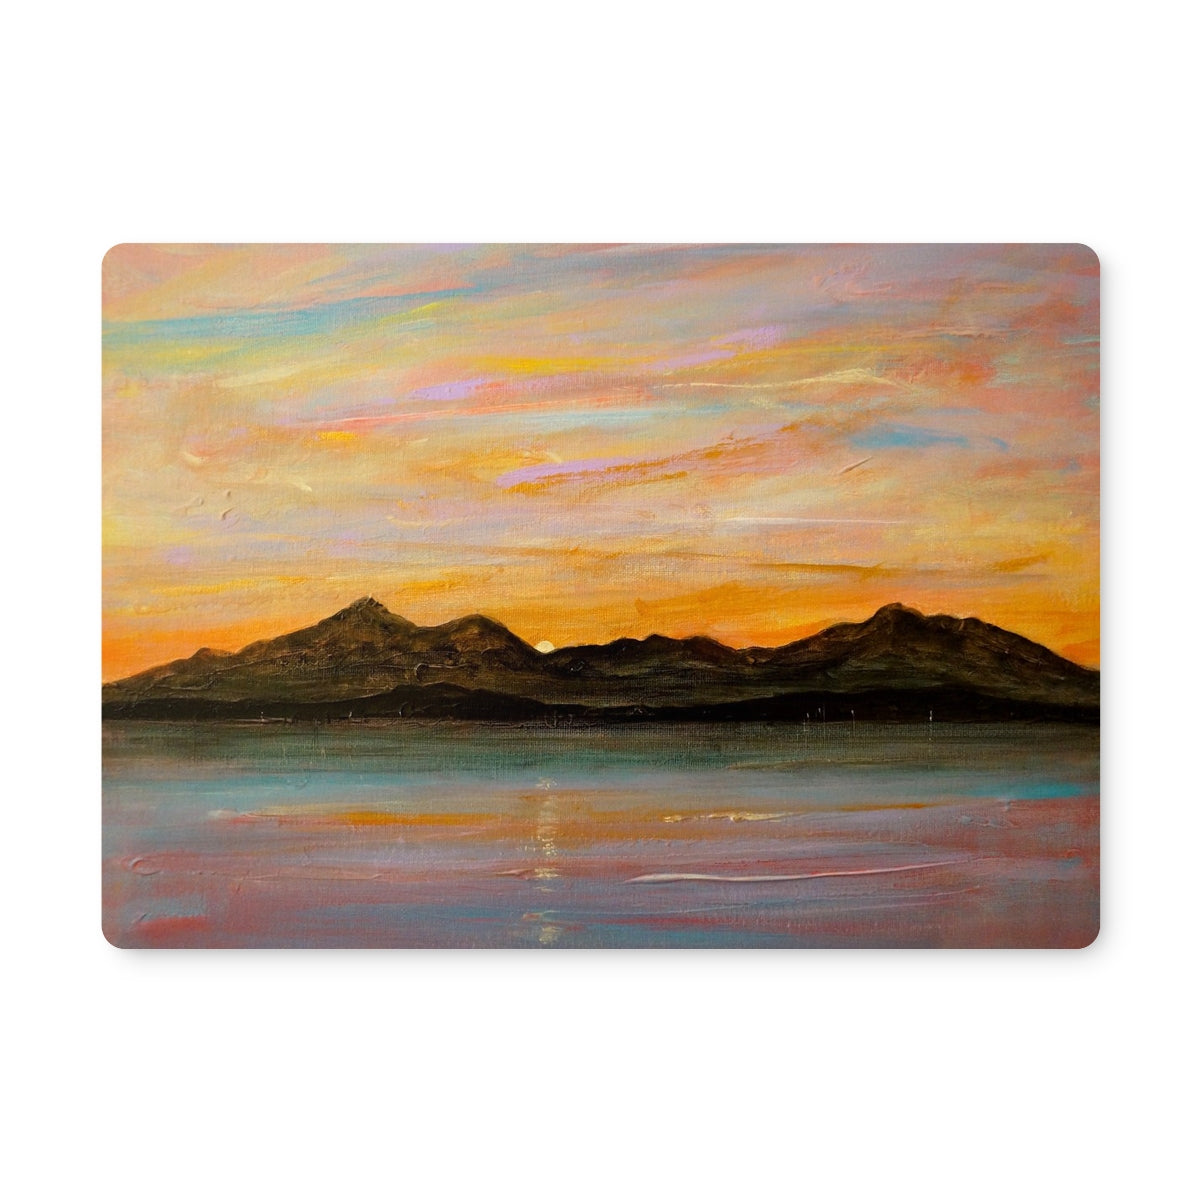 The Sleeping Warrior Arran Art Gifts Placemat-Placemats-Arran Art Gallery-4 Placemats-Paintings, Prints, Homeware, Art Gifts From Scotland By Scottish Artist Kevin Hunter